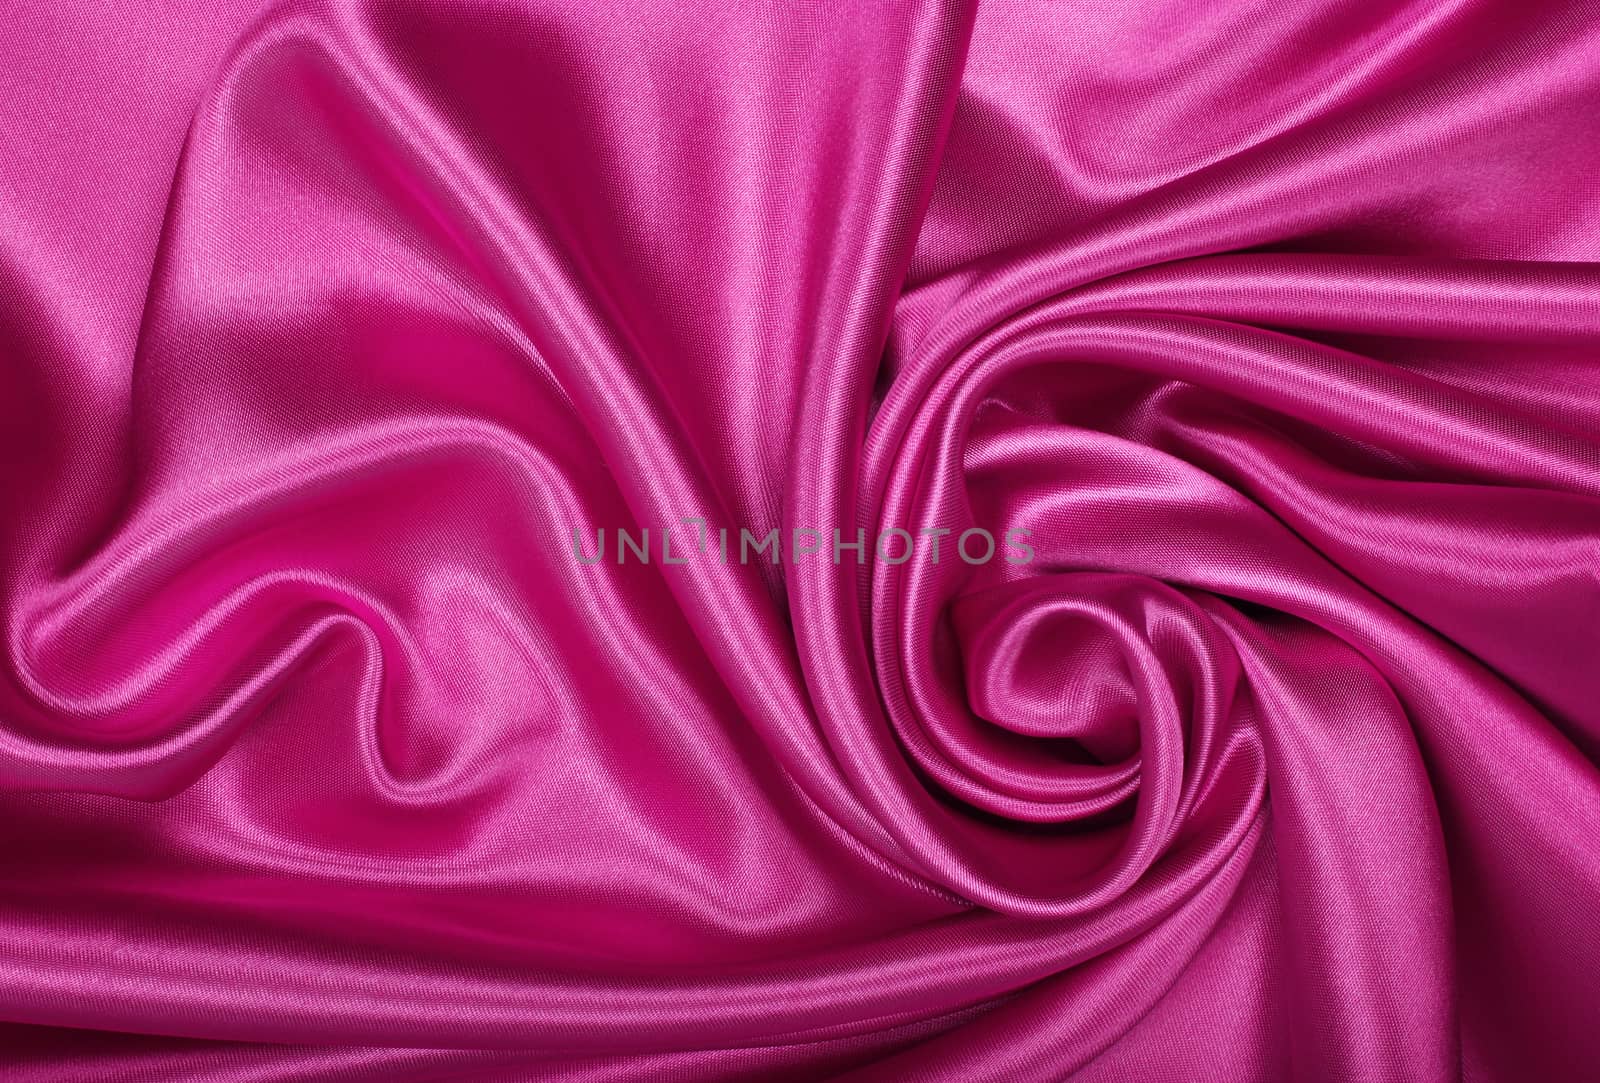 Smooth elegant pink silk or satin as background by oxanatravel